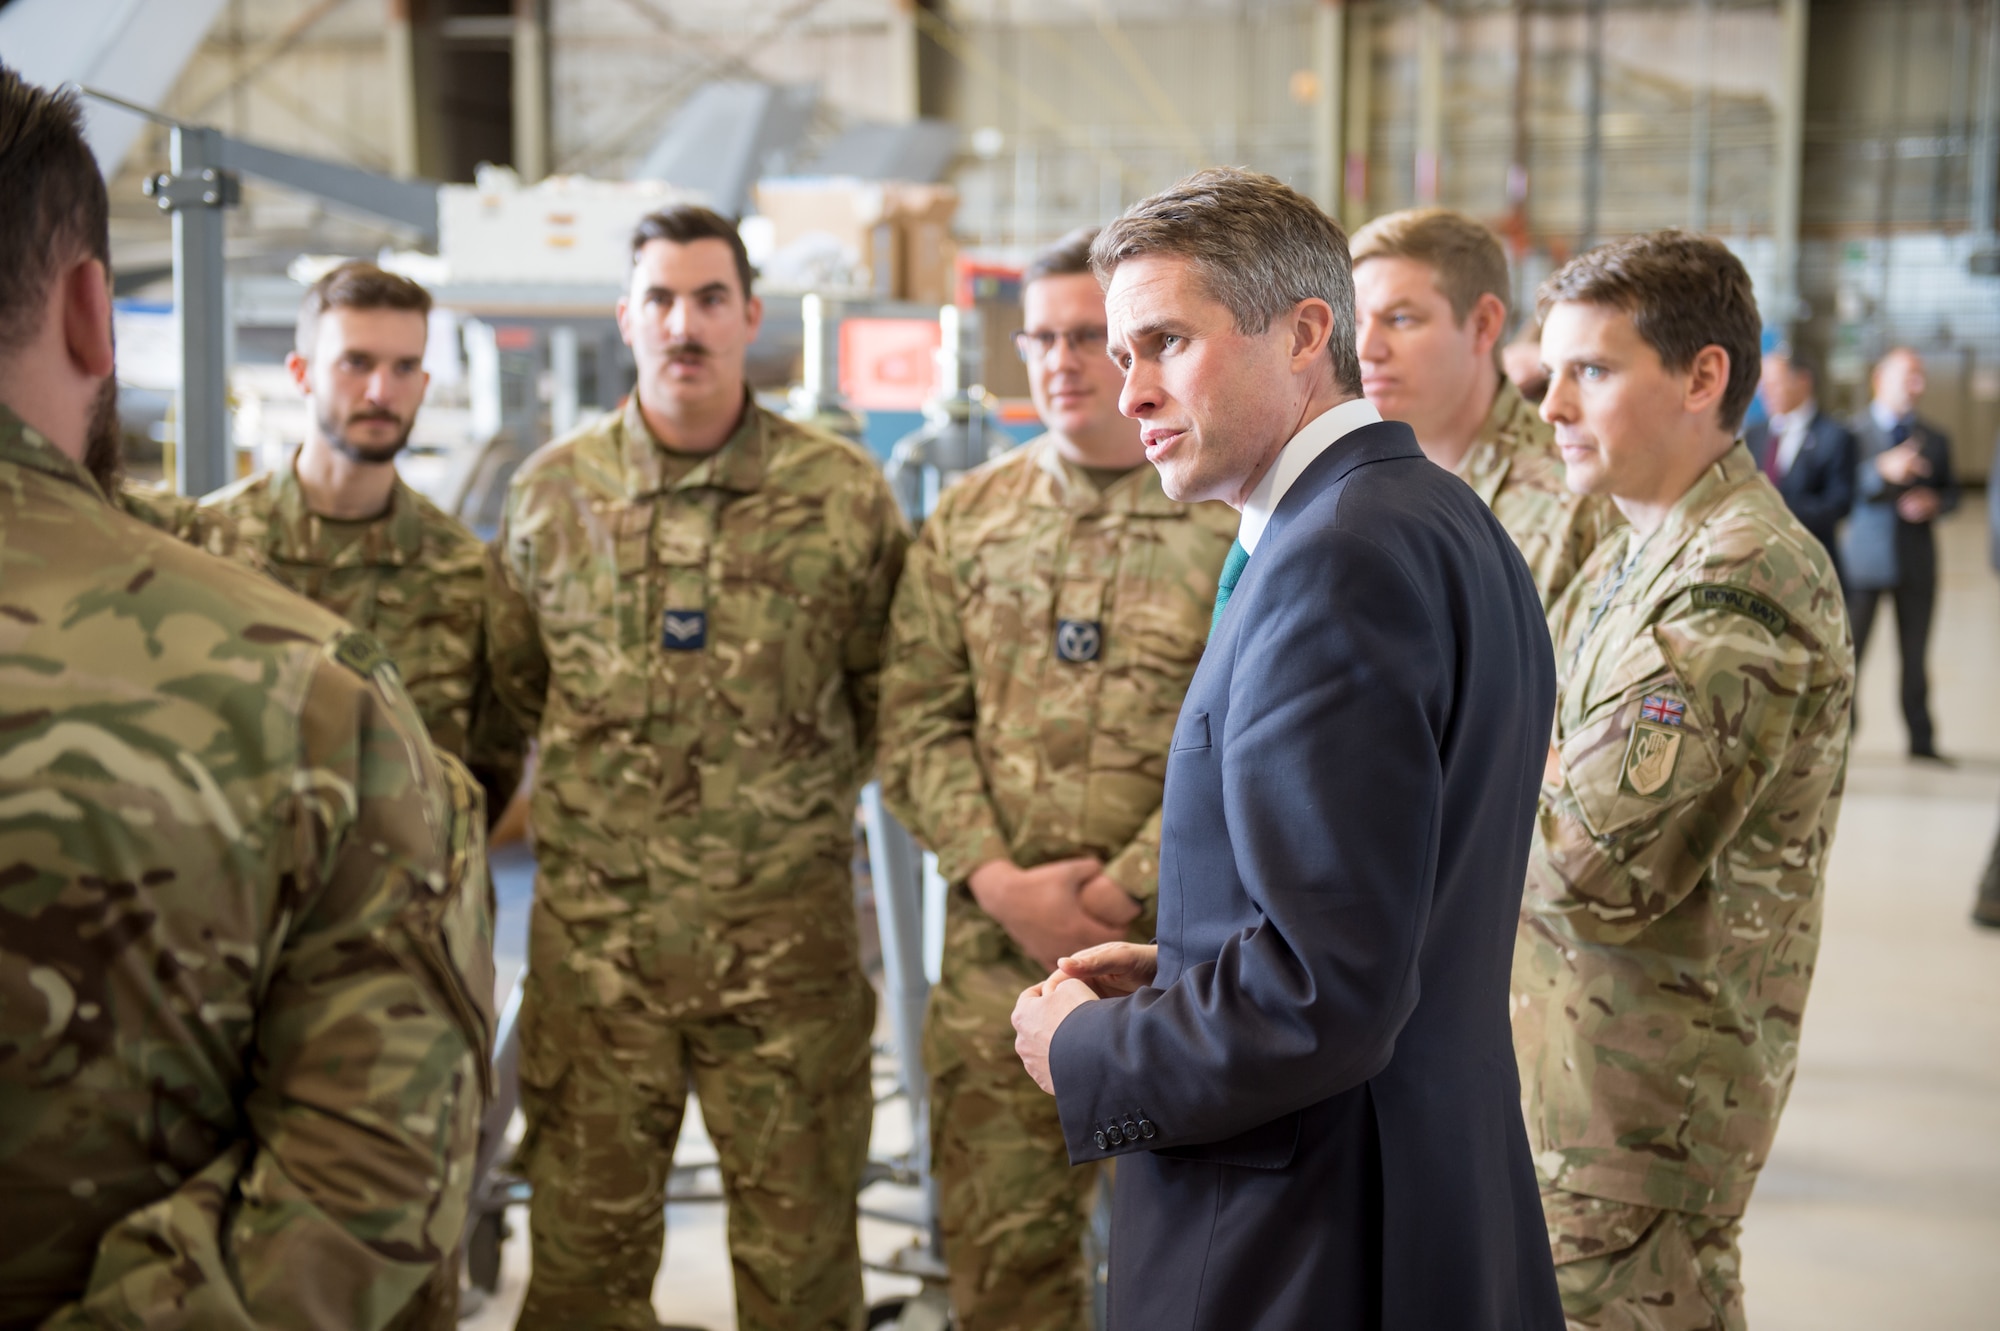 Secretary of State for Defence Gavin Williamson CBE (Commander of the Most Excellent Order of the British Empire) meets with members of the Royal Air Force's 17 Squadron, which is the organization on Edwards Air Force Base responsible for the operational test and evaluation of the U.K.'s F-35 Joint Strike Fighter, Dec. 2. (U.S. Air Force photo by Kyle Larson)